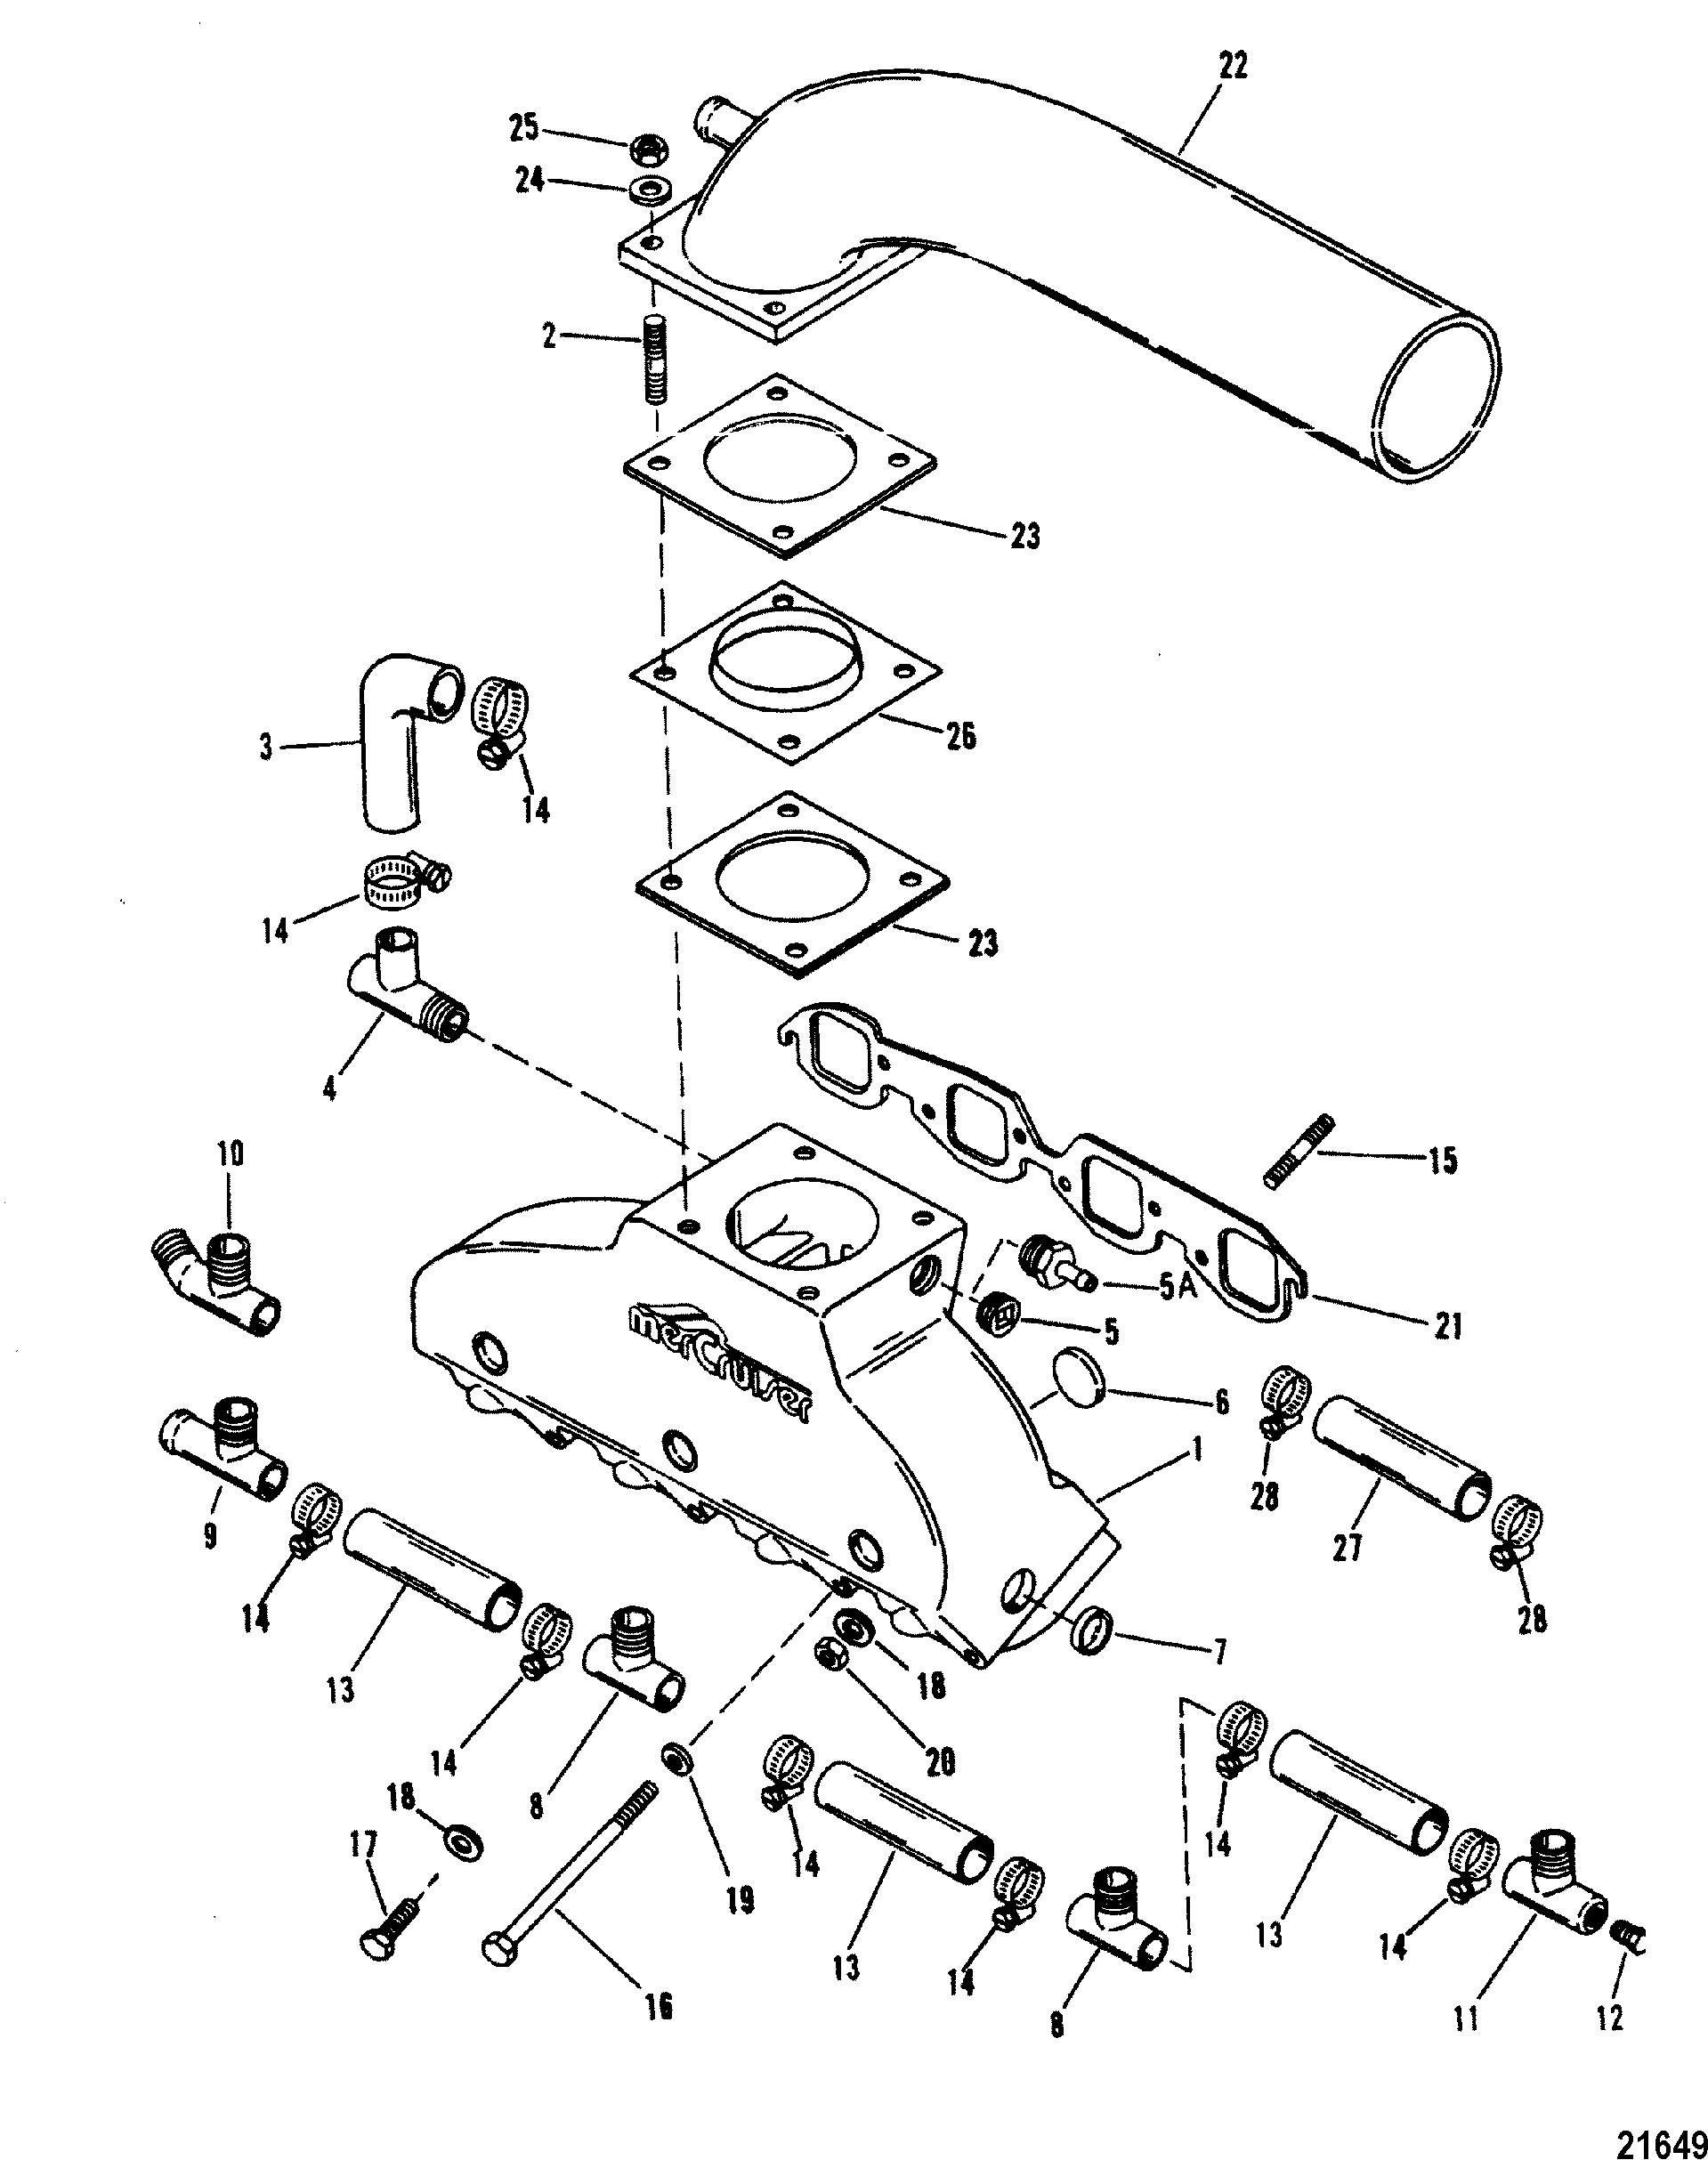 Exhaust Manifold / Elbow(425 GIL System)